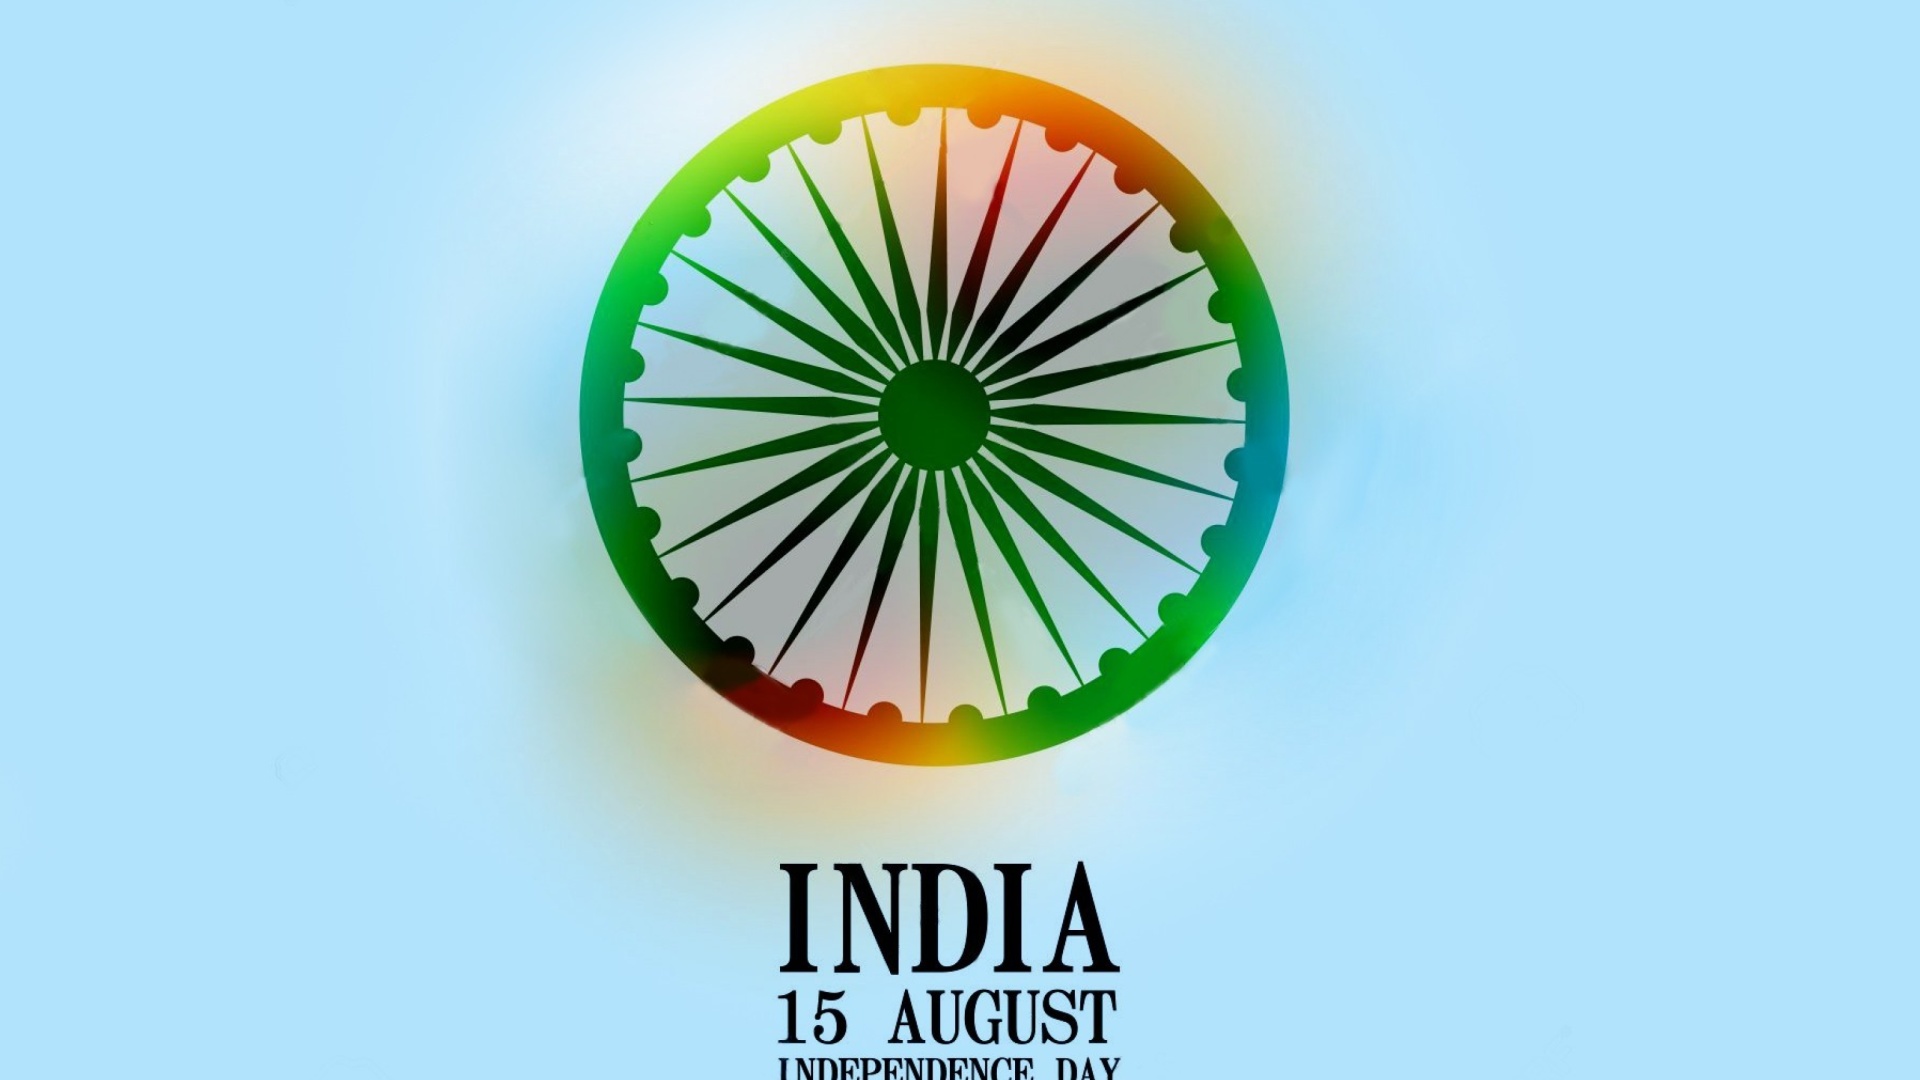 India Independence Day 15 August wallpaper 1920x1080